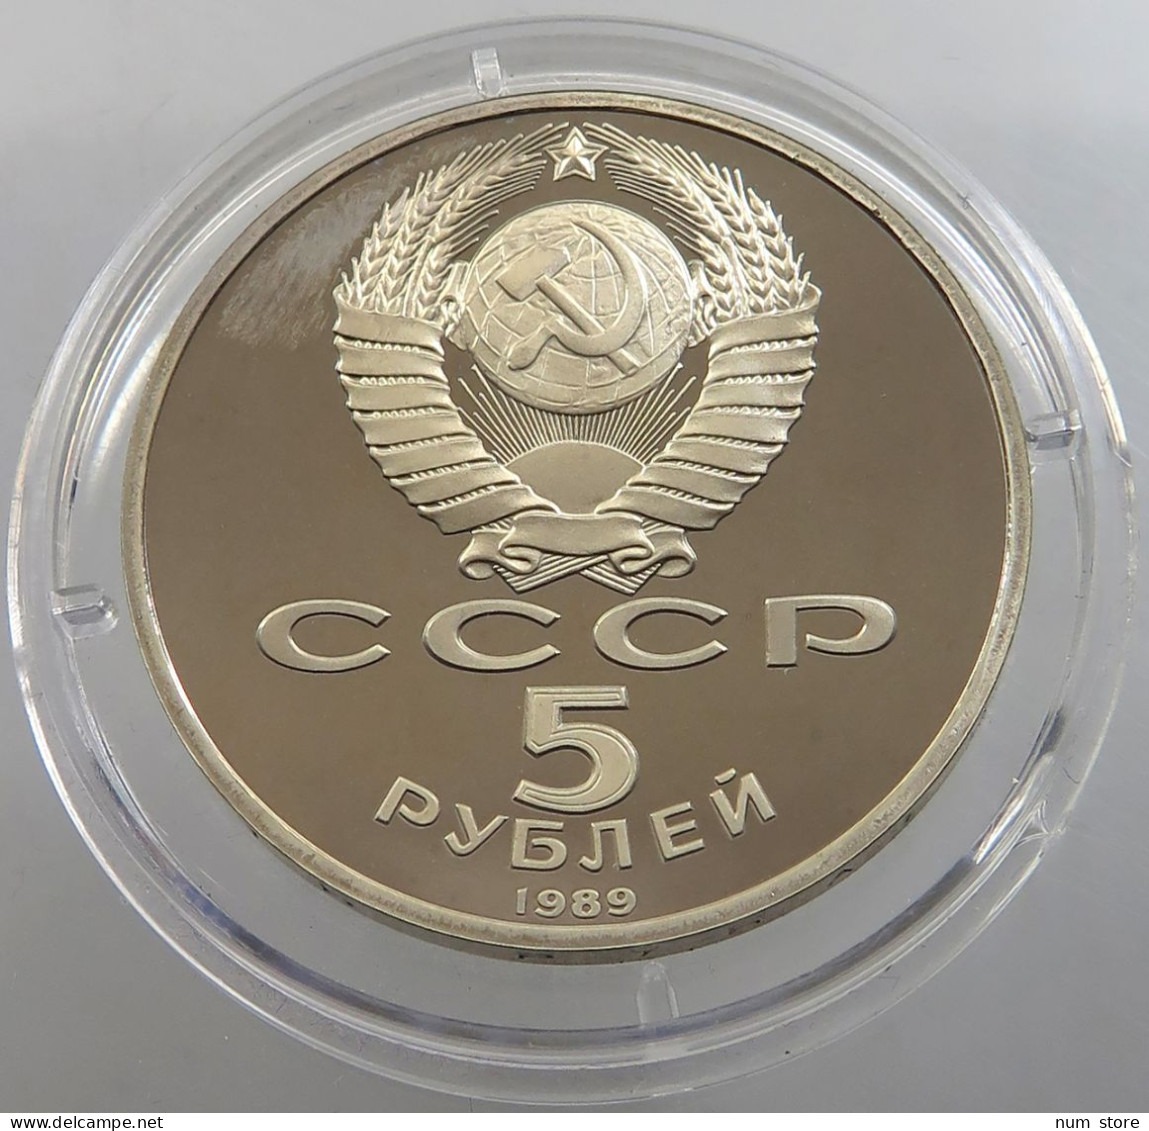 RUSSIA USSR 5 ROUBLES 1989 PROOF #sm14 0395 - Russia